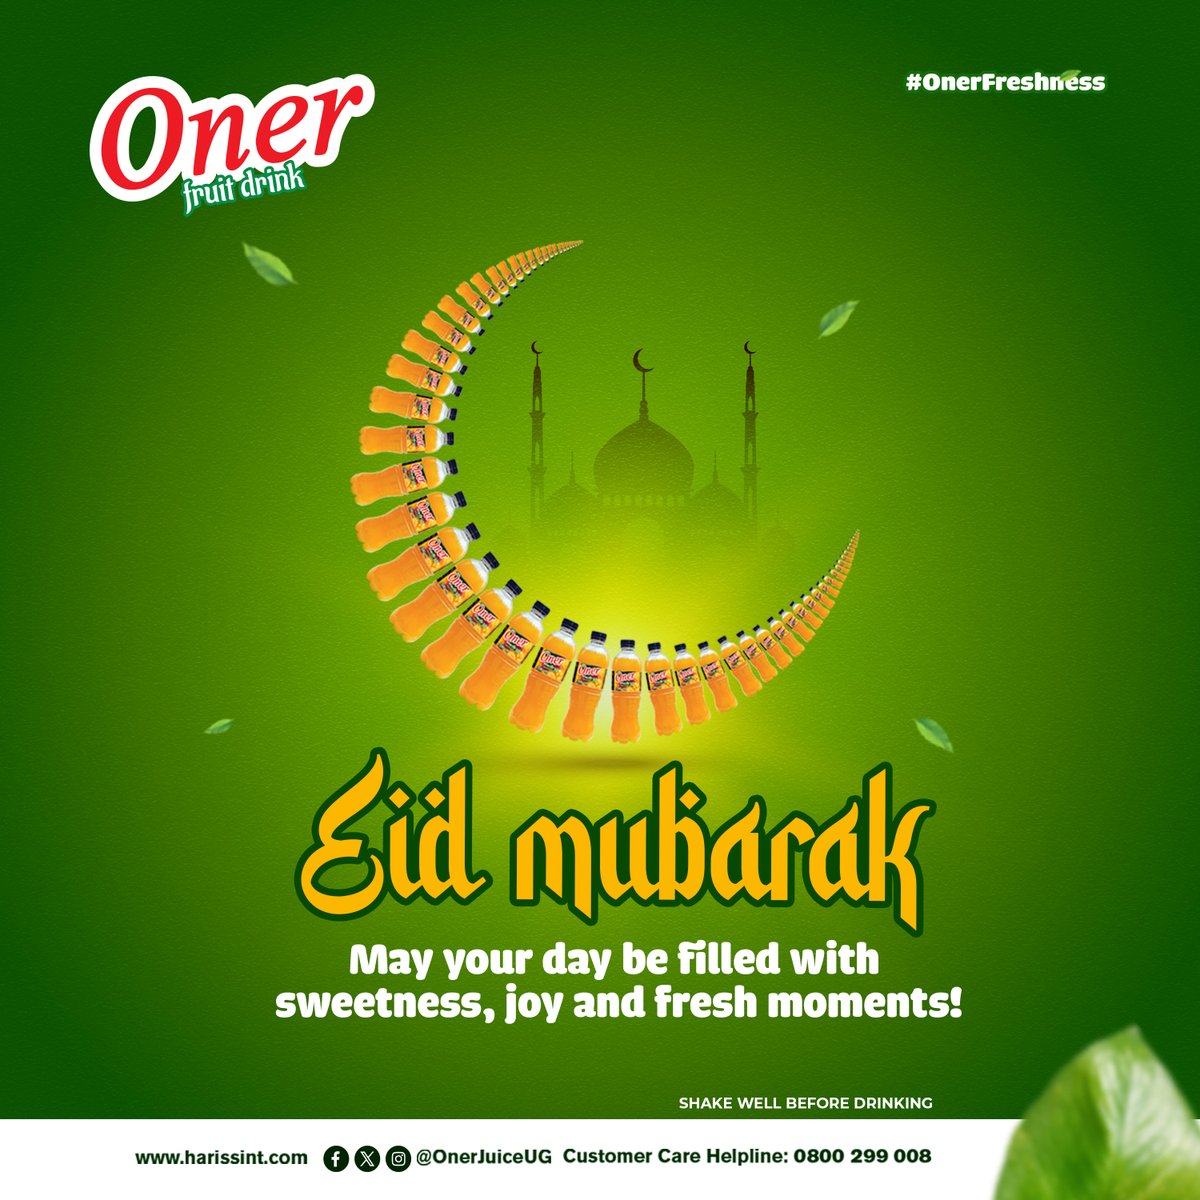 Sending warm wishes for a joyful and happy Eid to you and your loved ones. #EidMubarak!